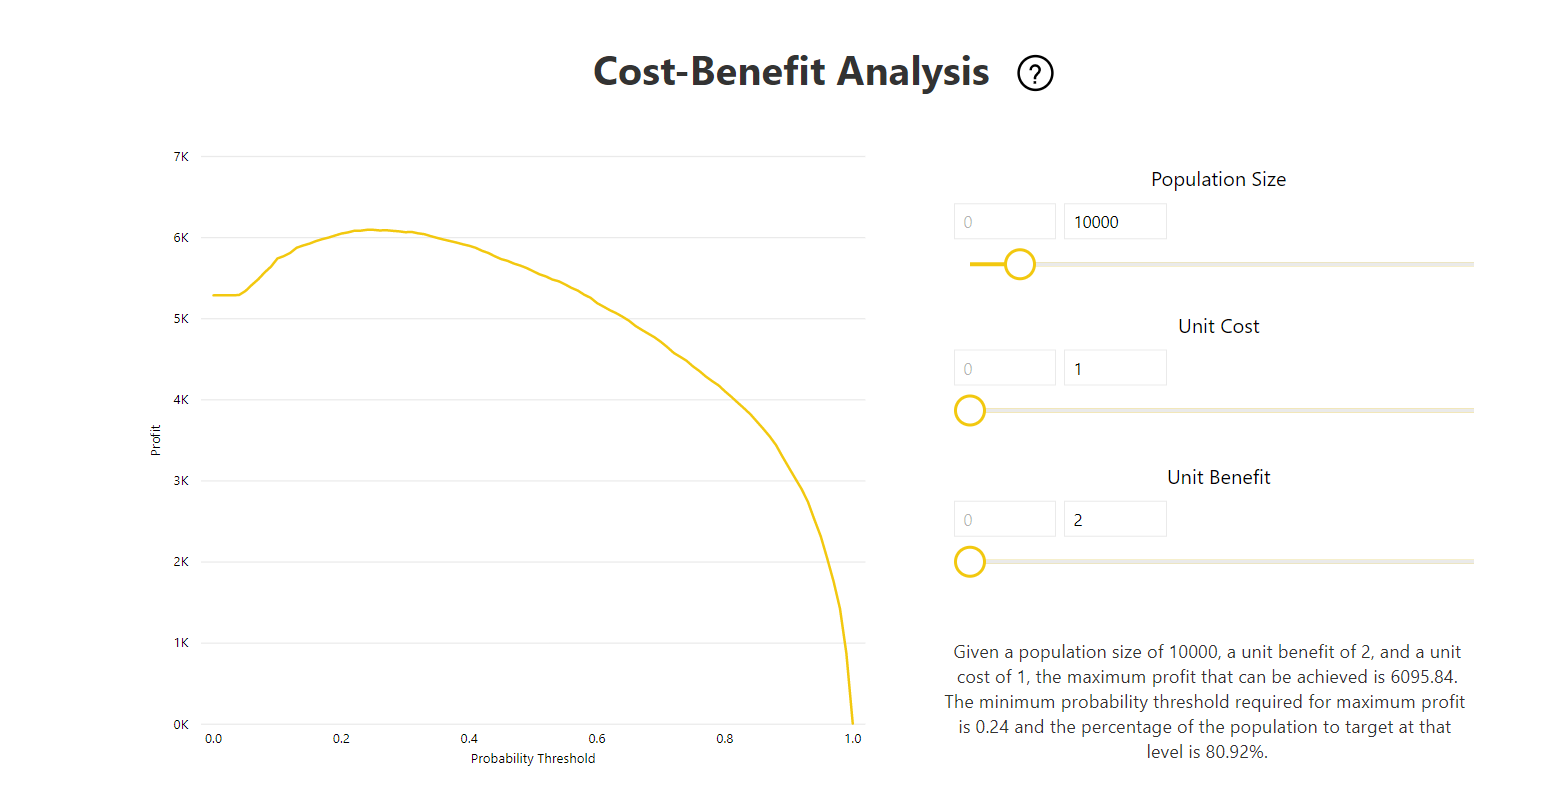 Screenshot of the Cost-Benefit Analysis graph in the model report.